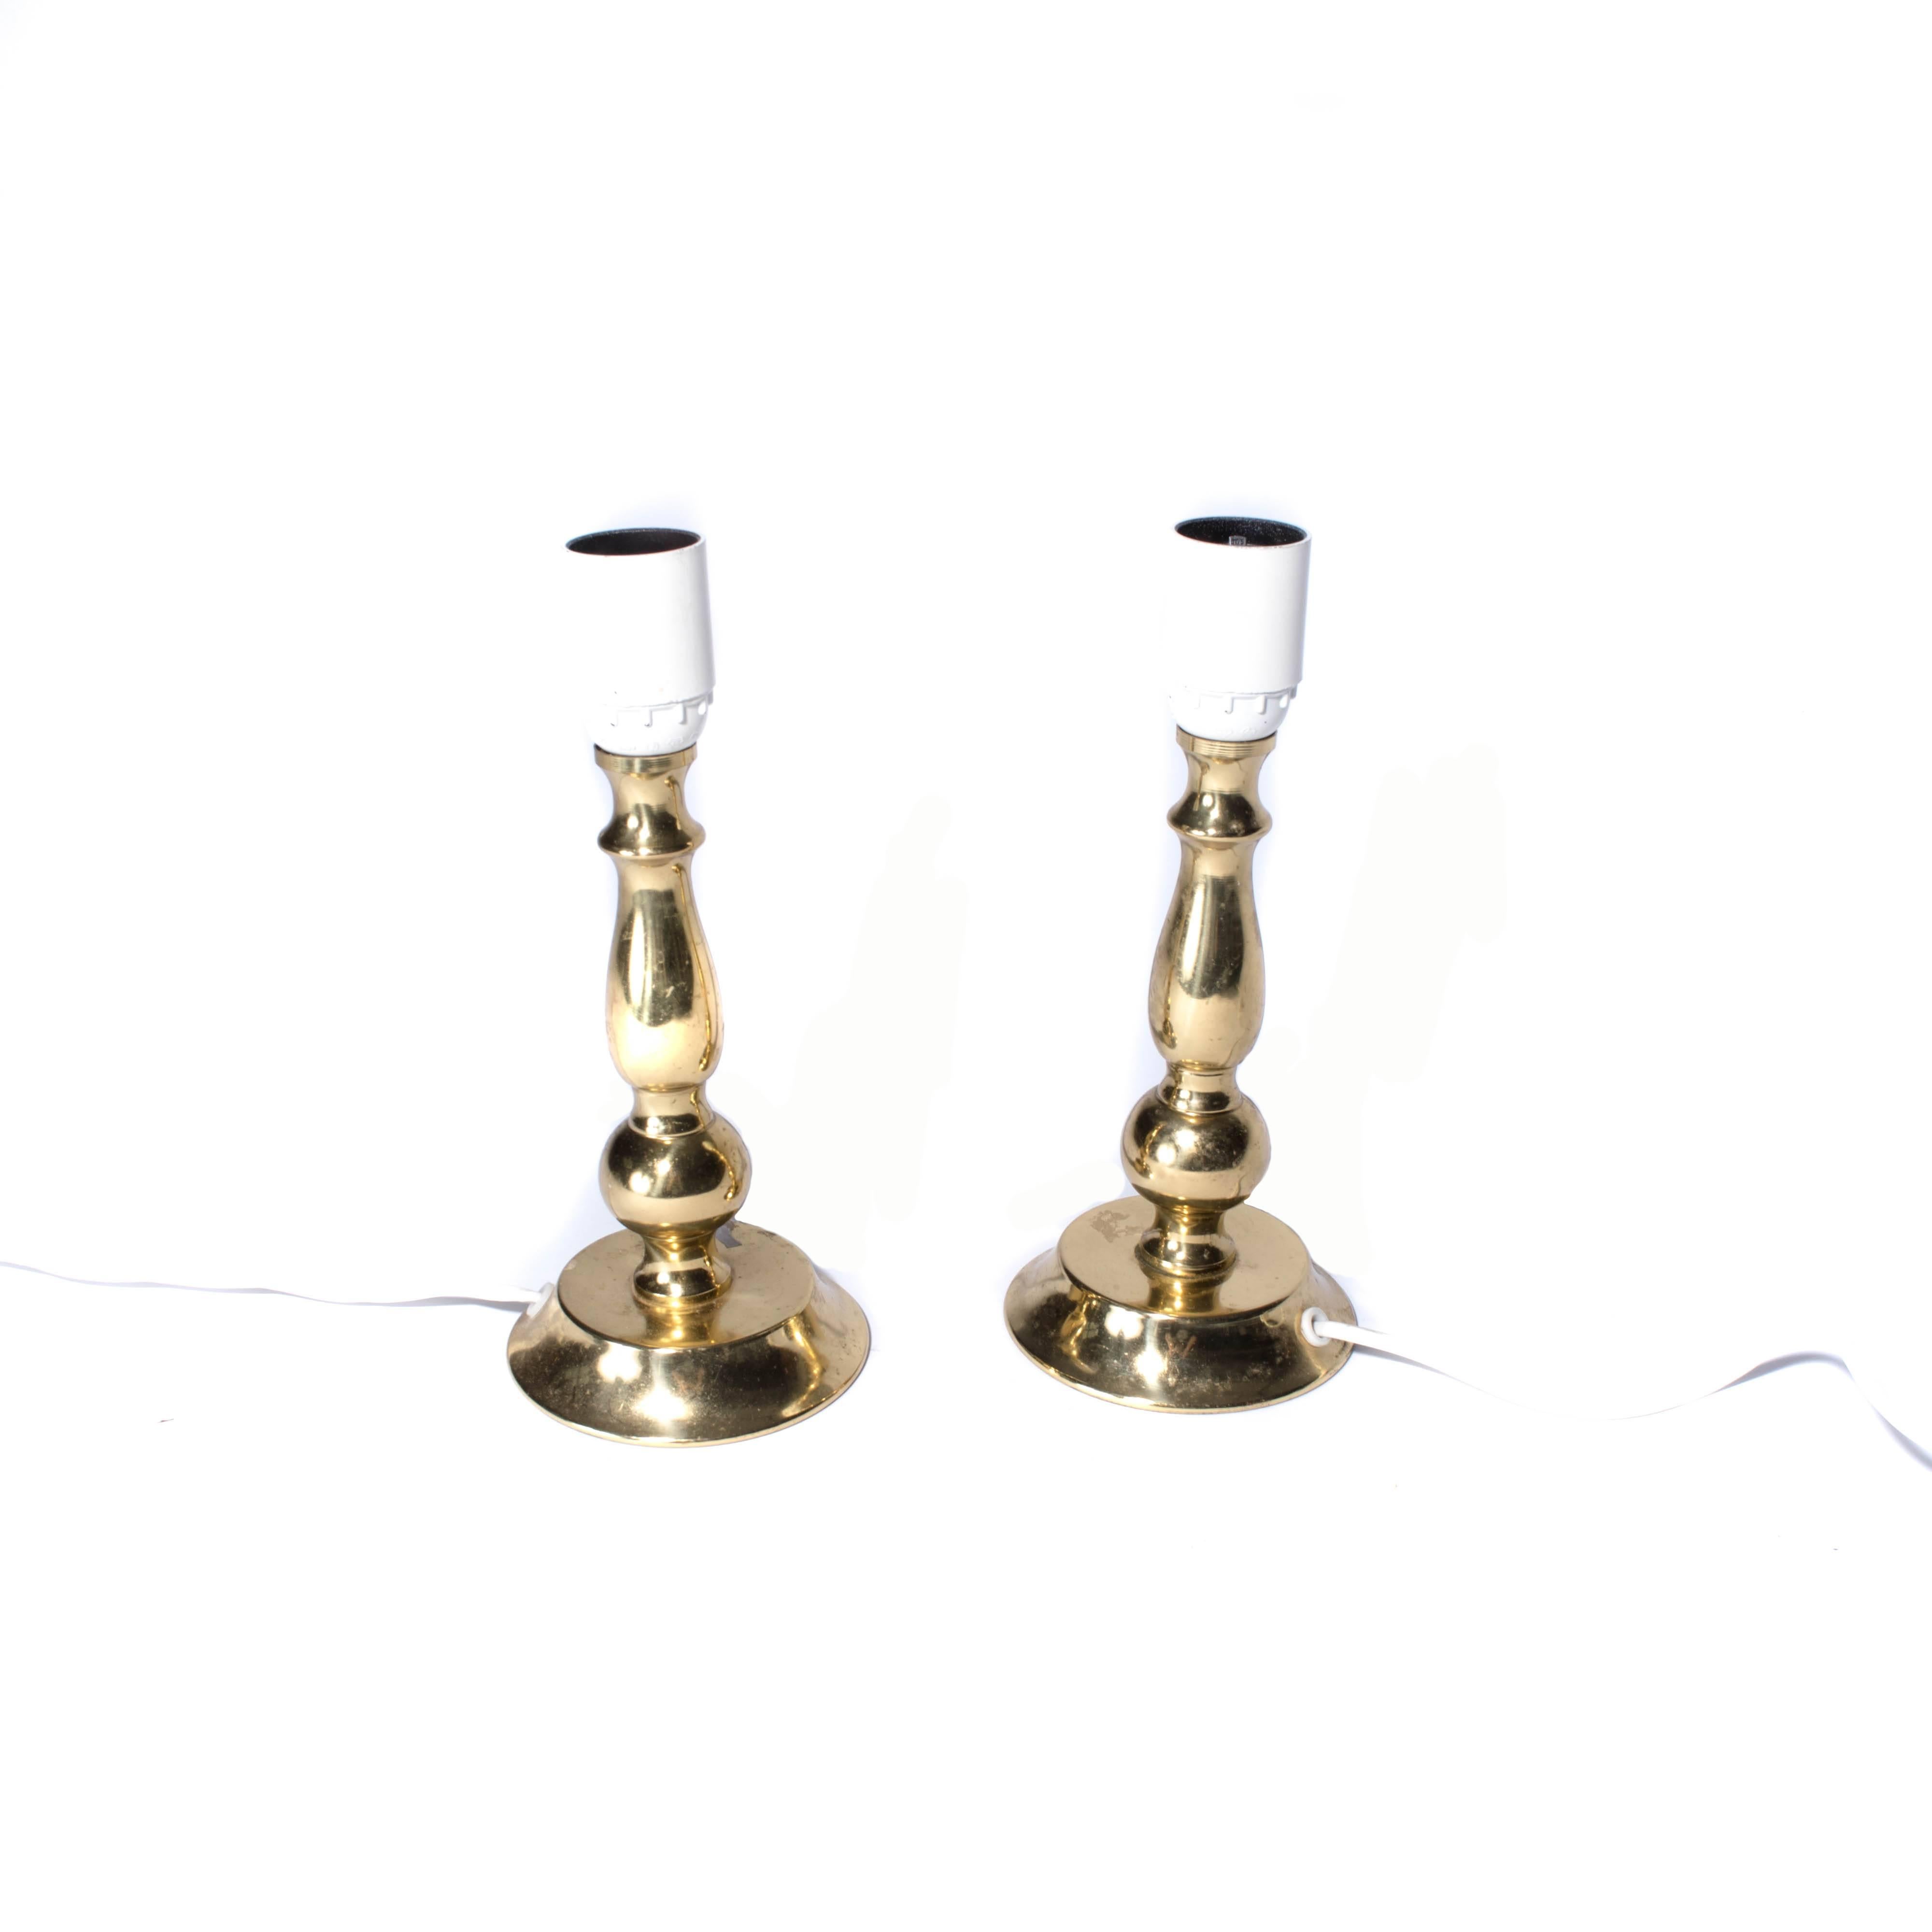 Small table lamps in brass. Very cute for any bedroom or living room.